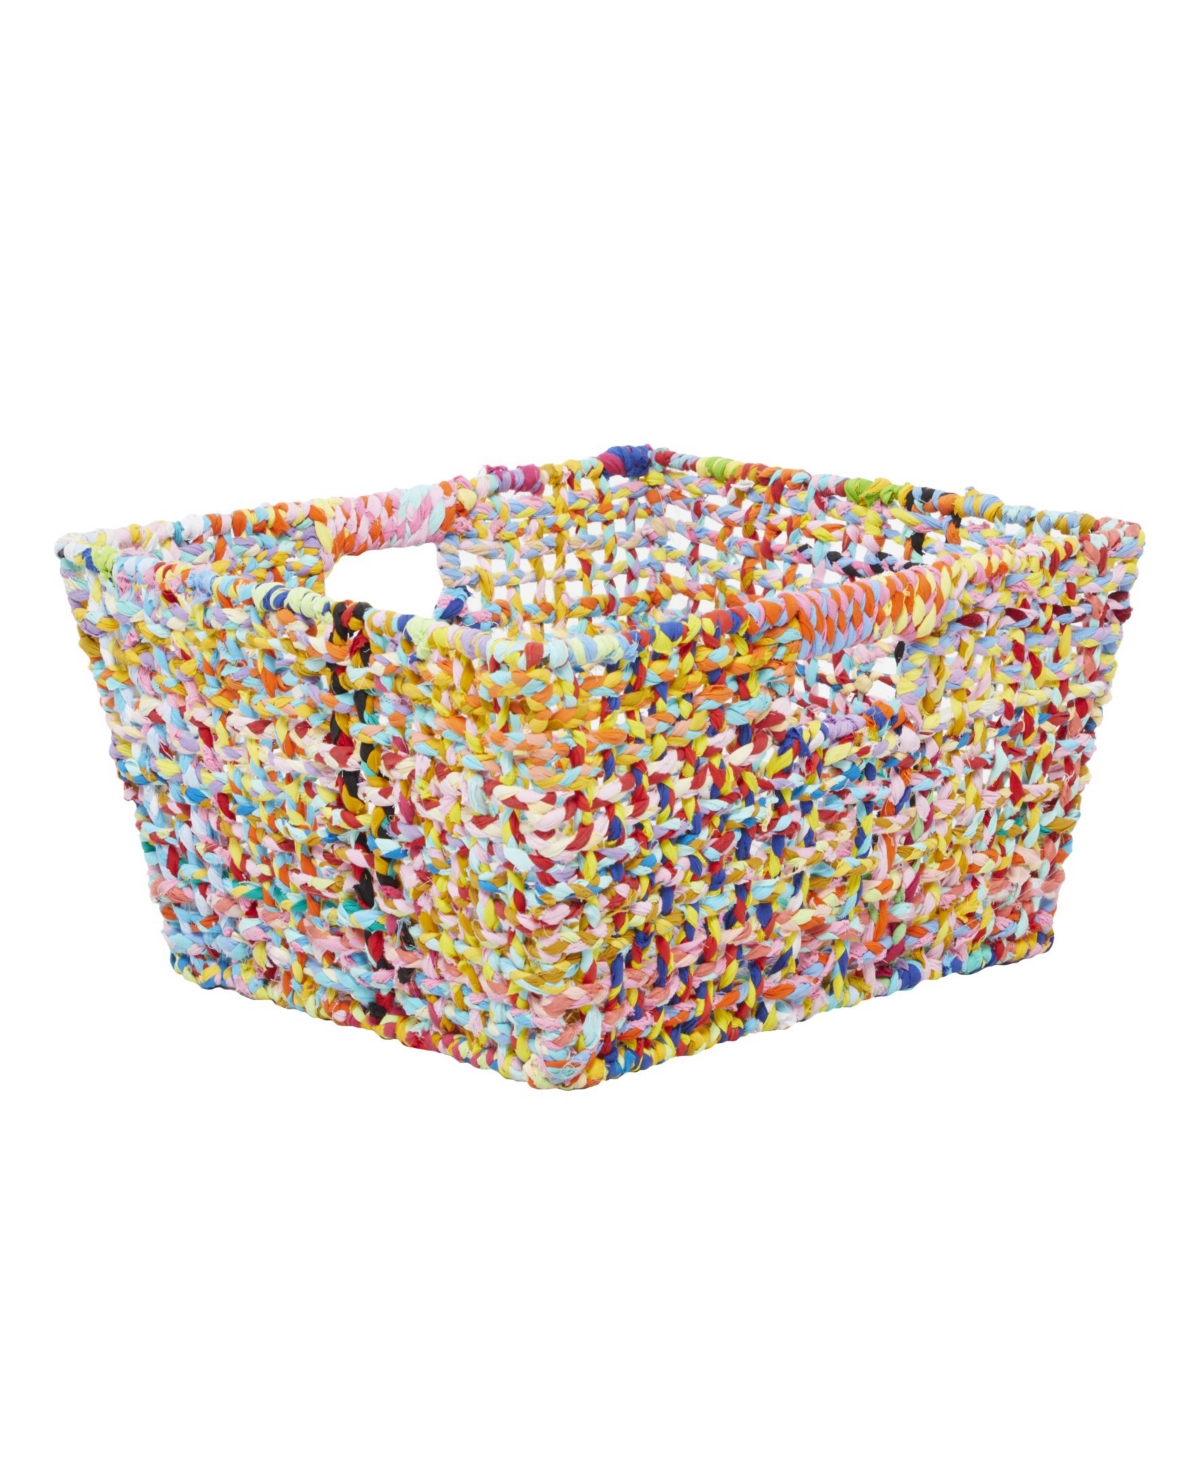 Rosemary Lane Eclectic Storage Basket, 19" X 16" In Multi